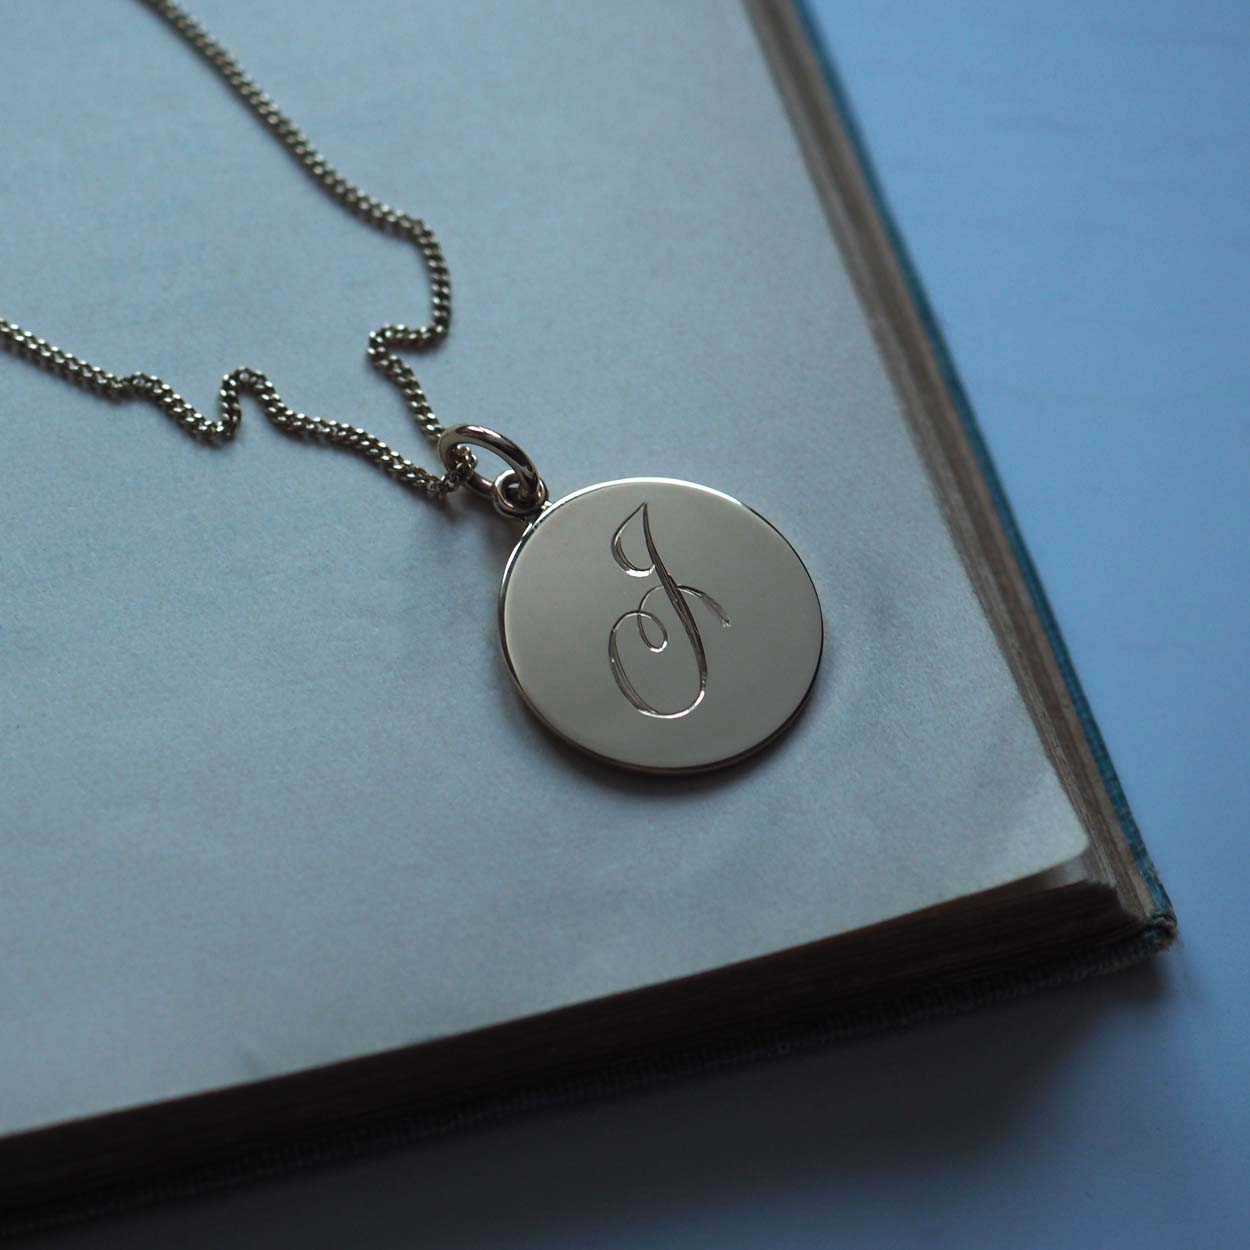 Bianca Jones handcrafted and hand-engraved solid 9ct gold initial charm, available in rose, white, or yellow gold, showcasing bespoke craftsmanship.